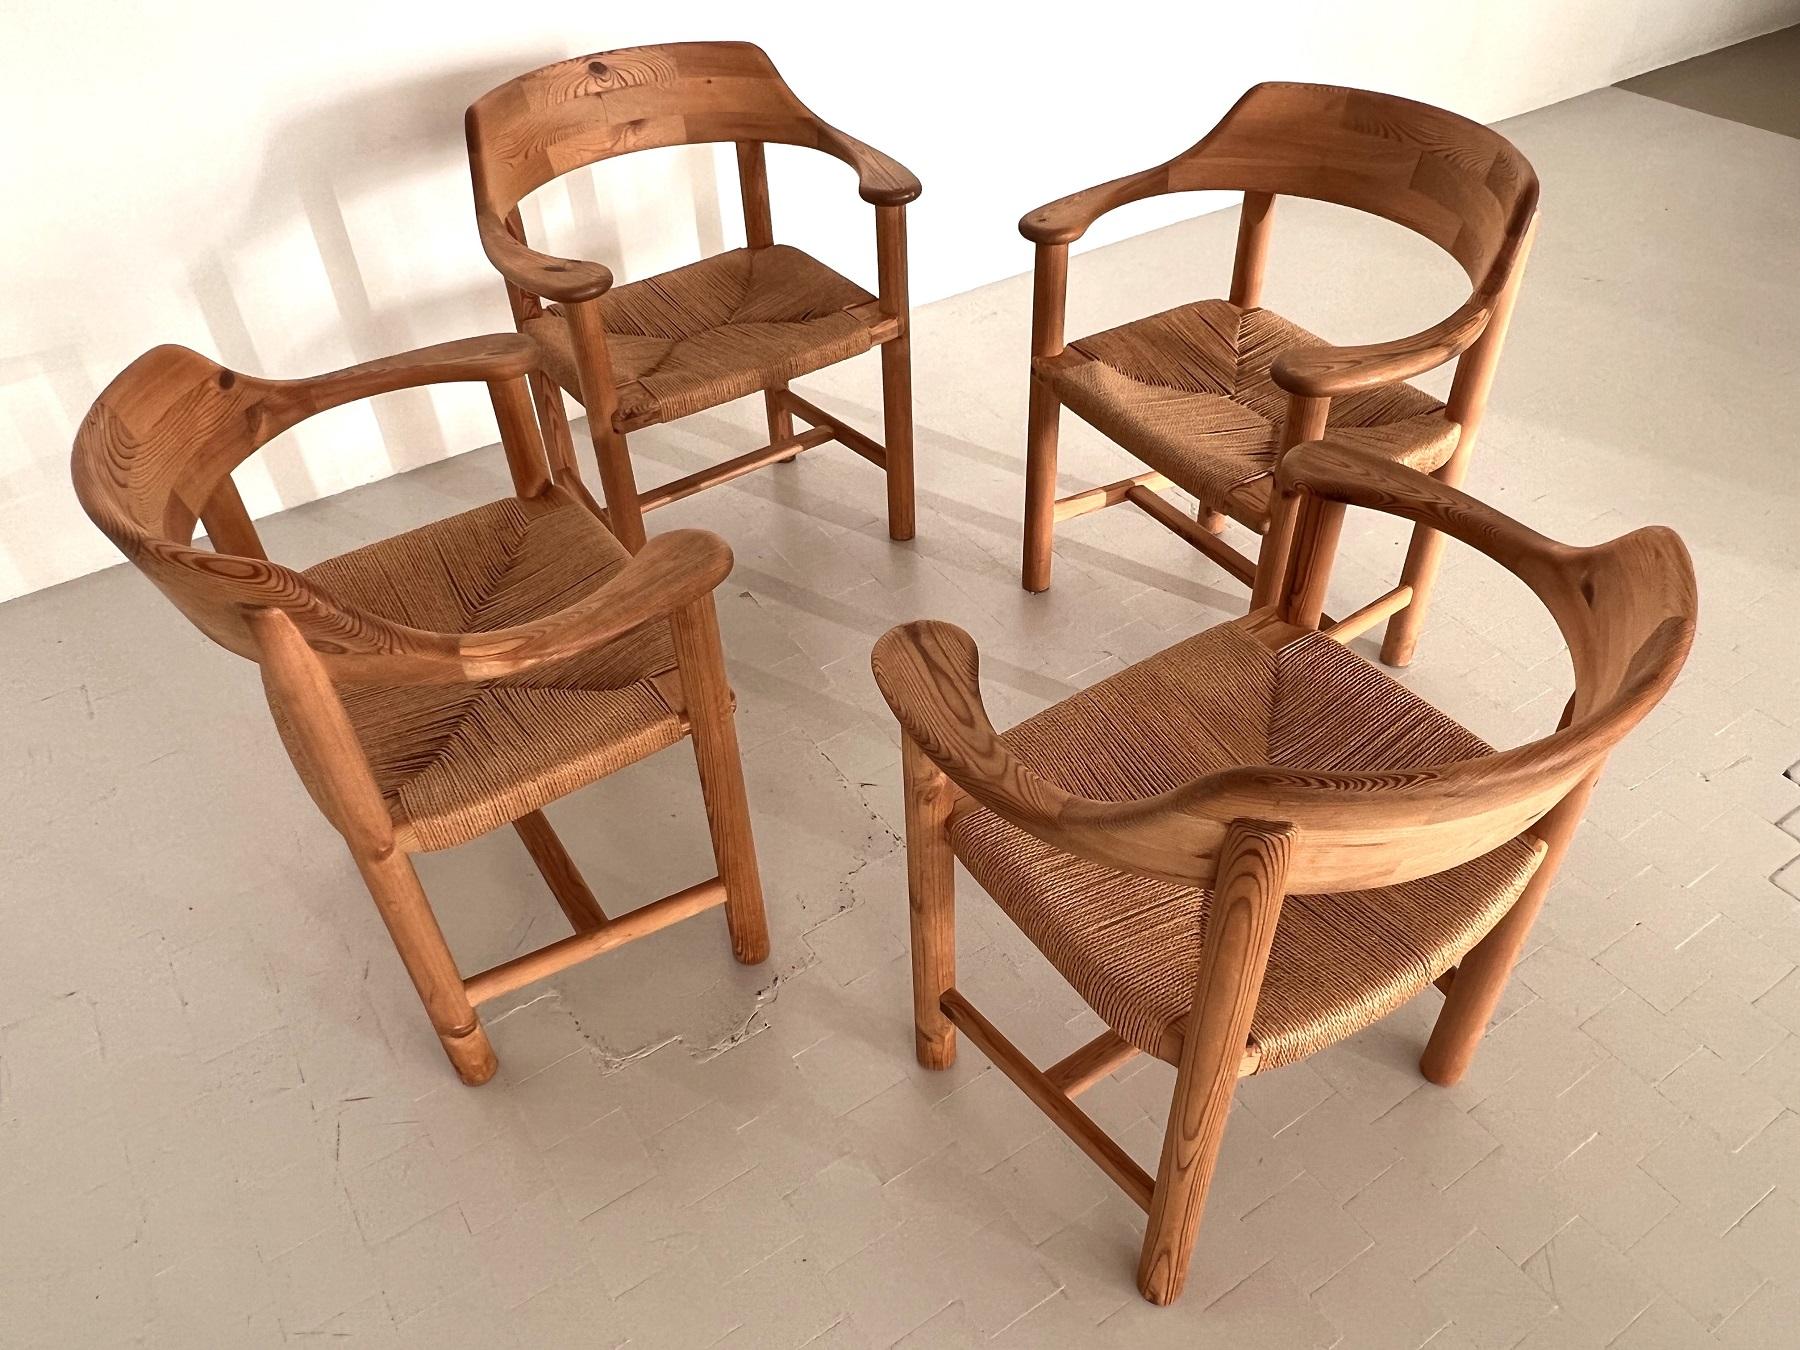 Rainer Daumiller Dining Chairs in Pine and Paper Cord, 1970s For Sale 7